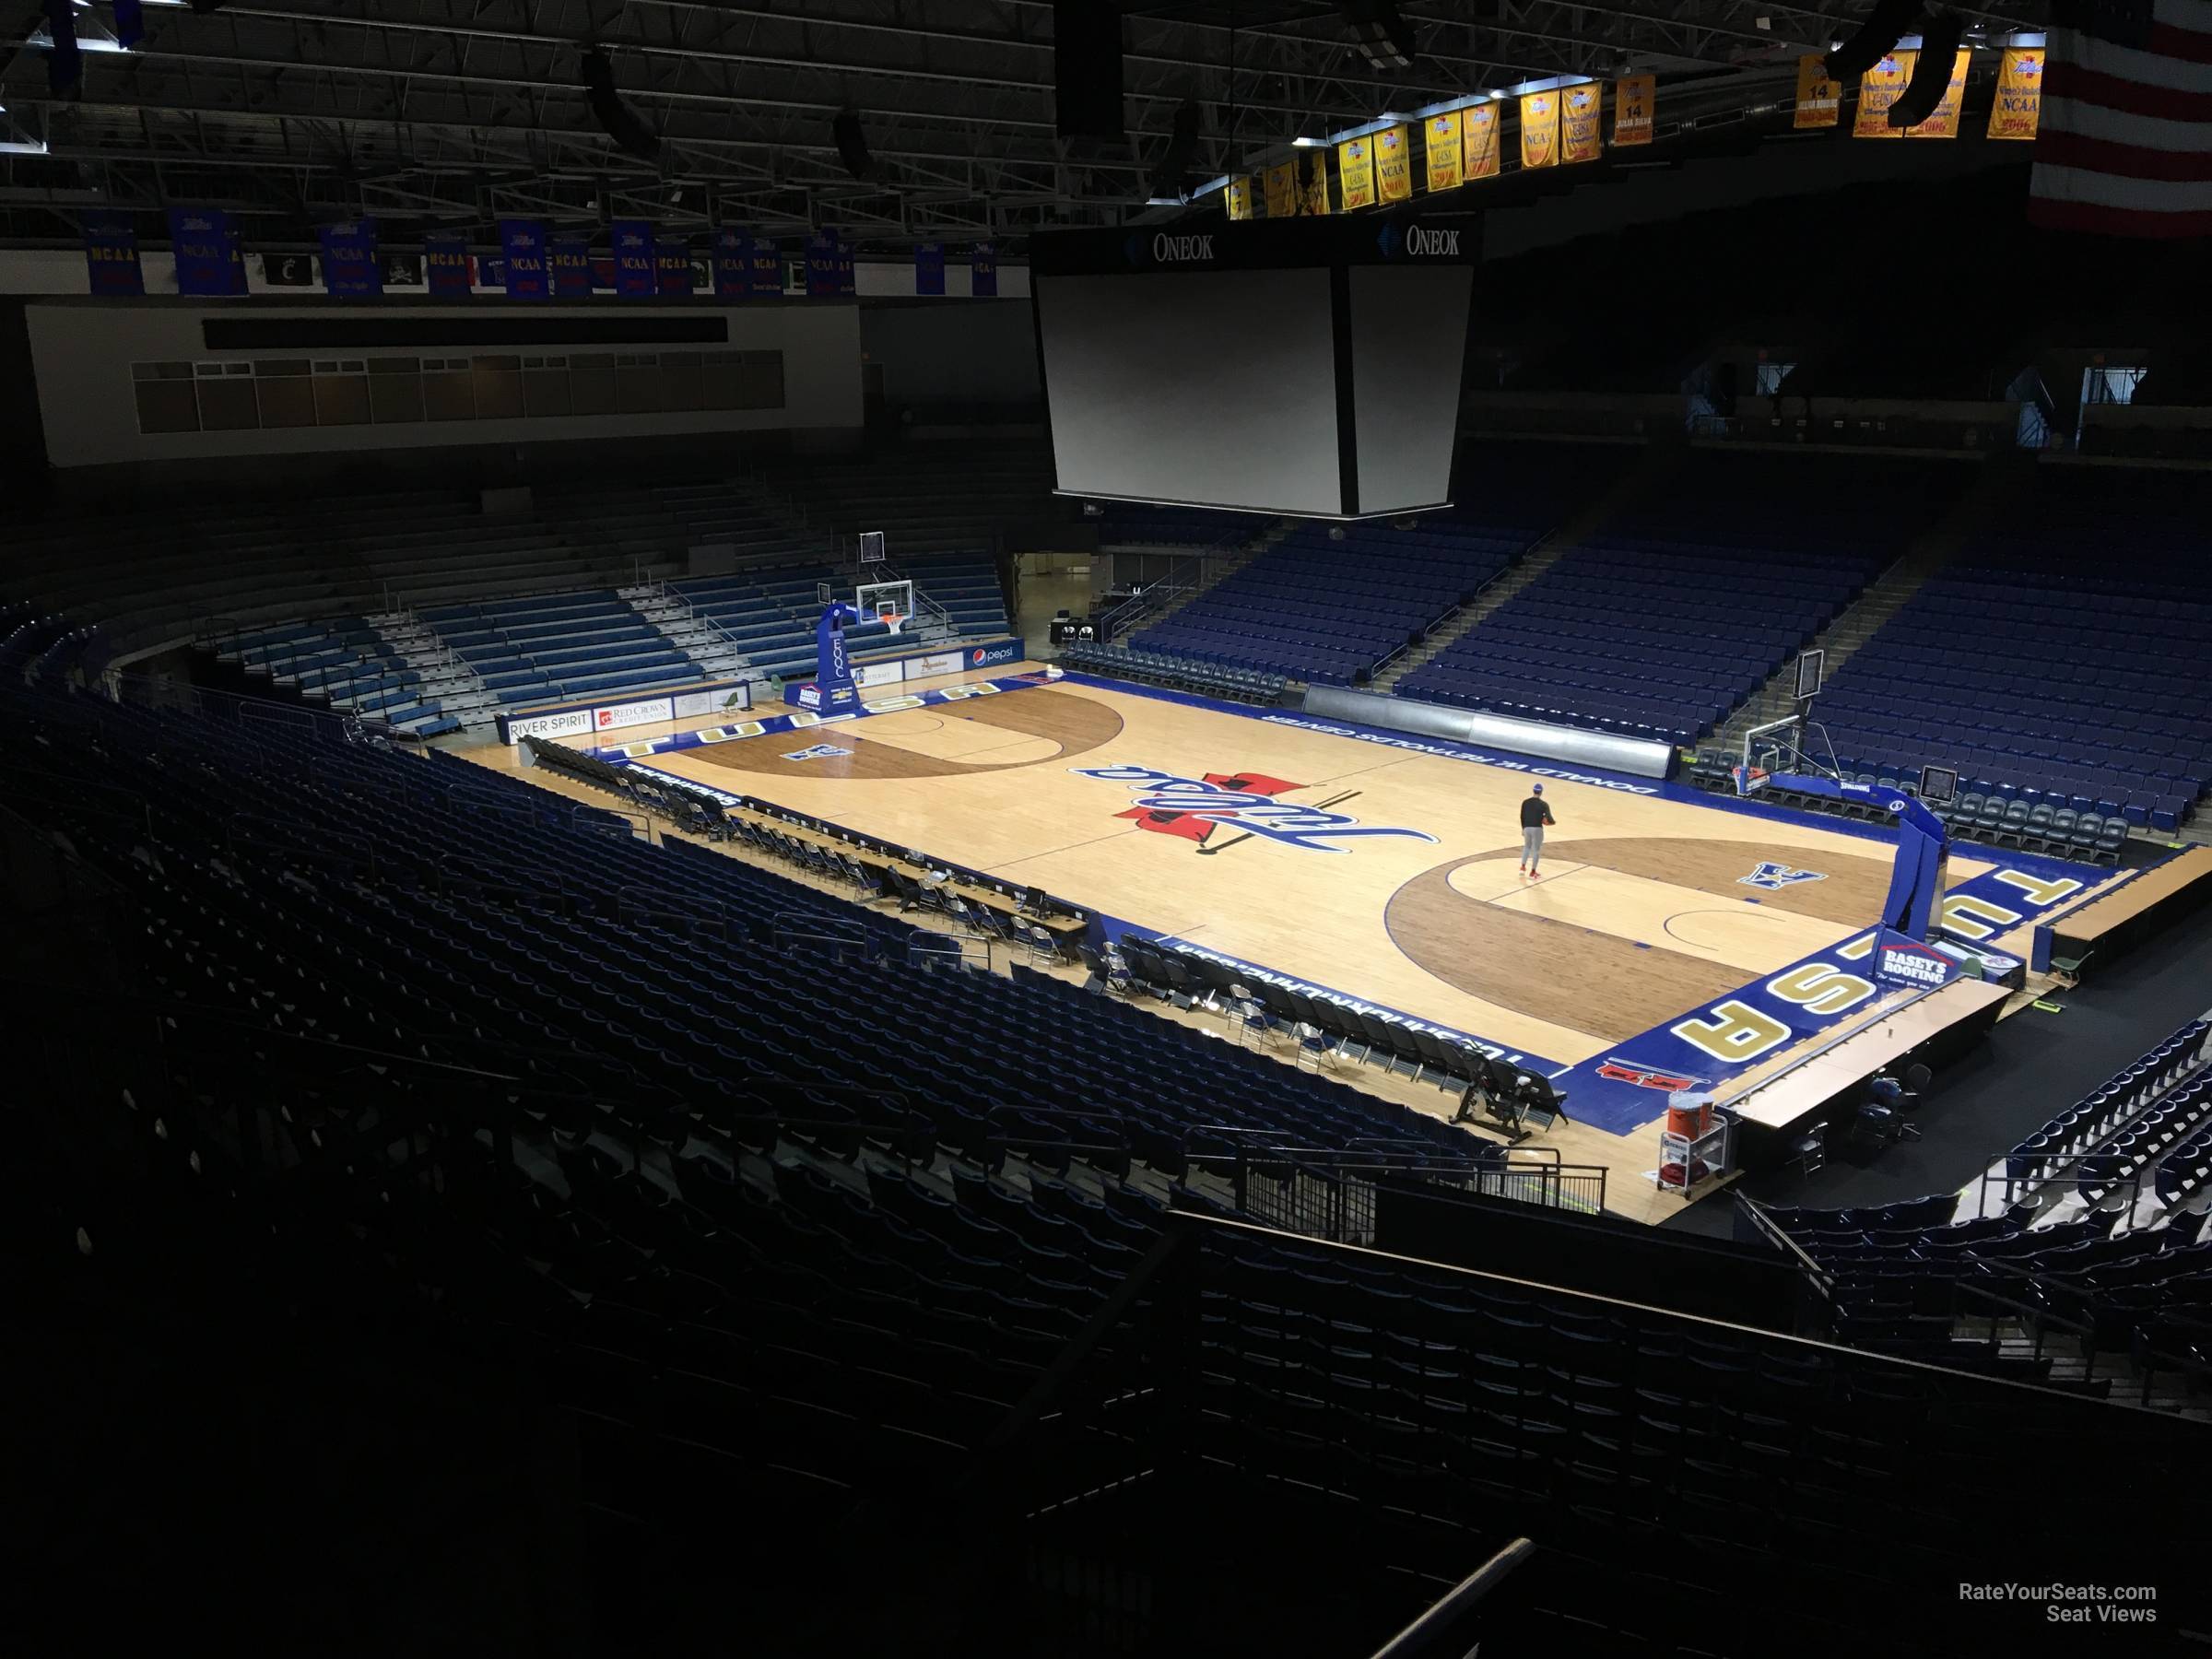 section 202, row d seat view  - reynolds center